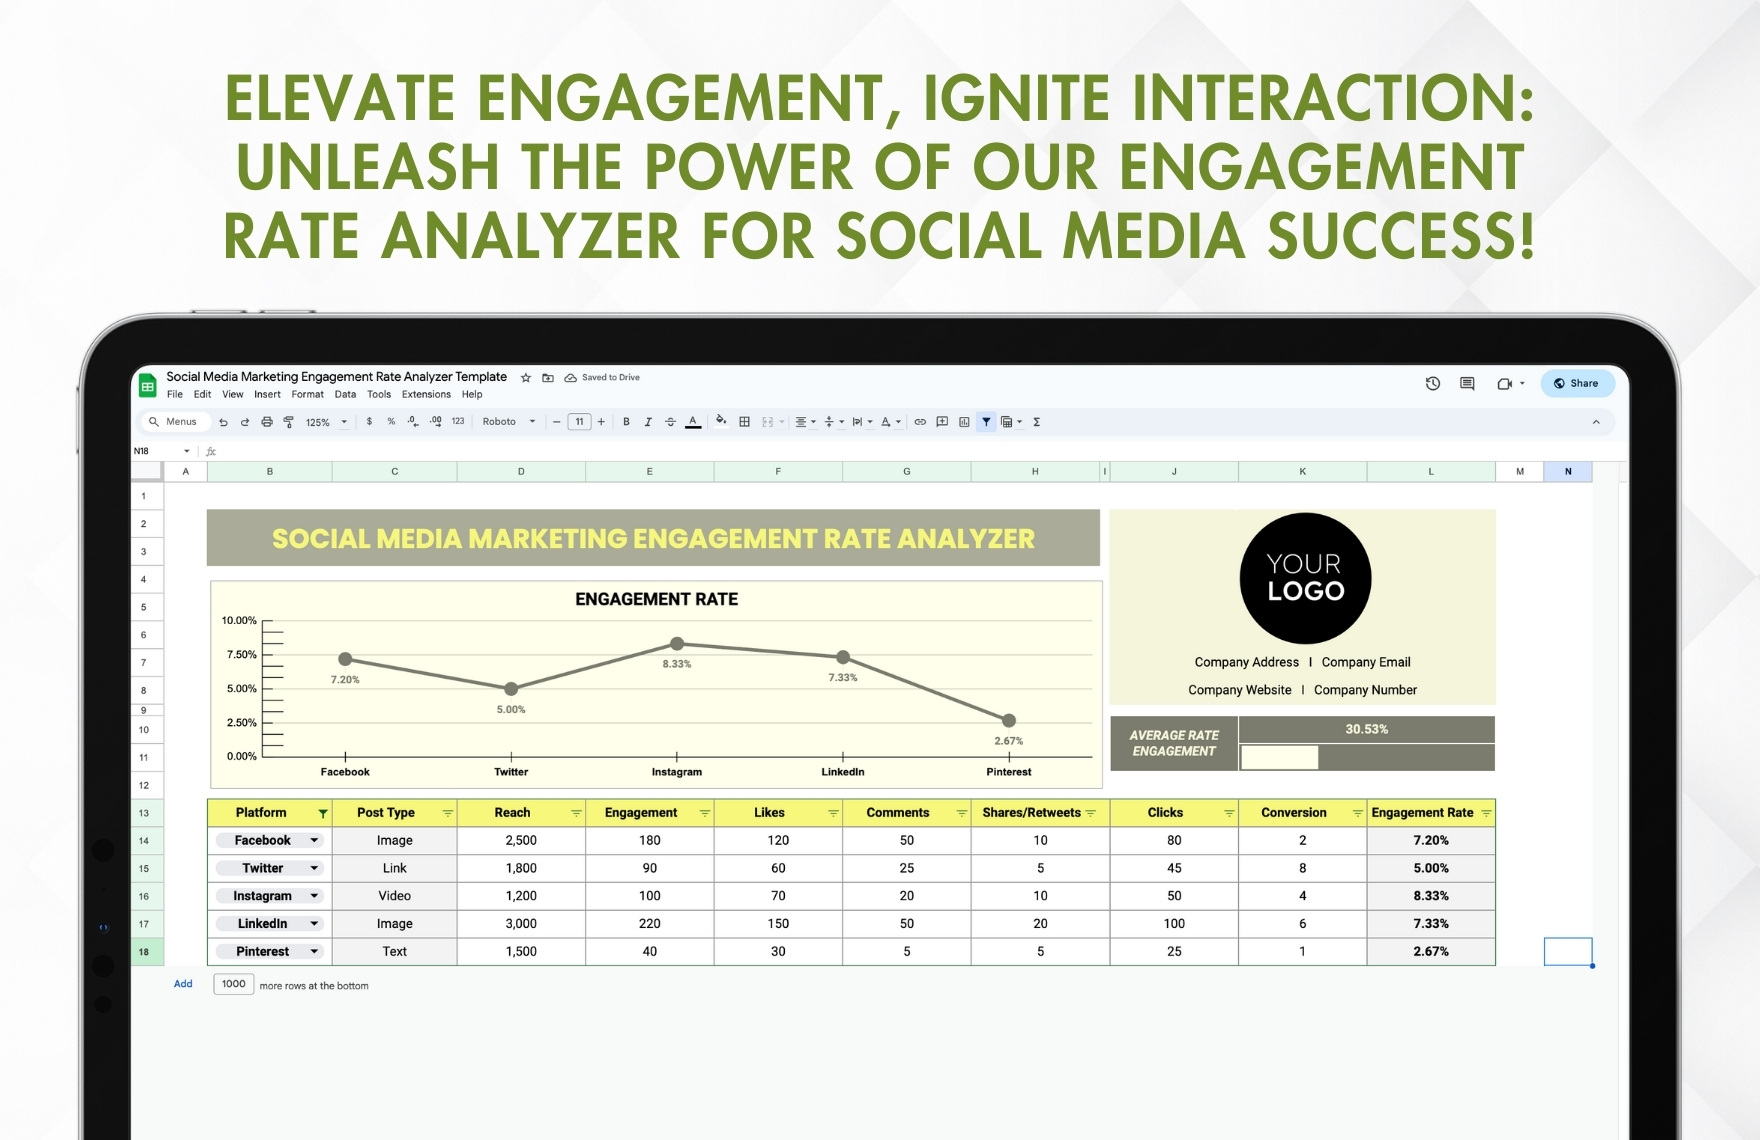 Social Media Marketing Engagement Rate Analyzer Template